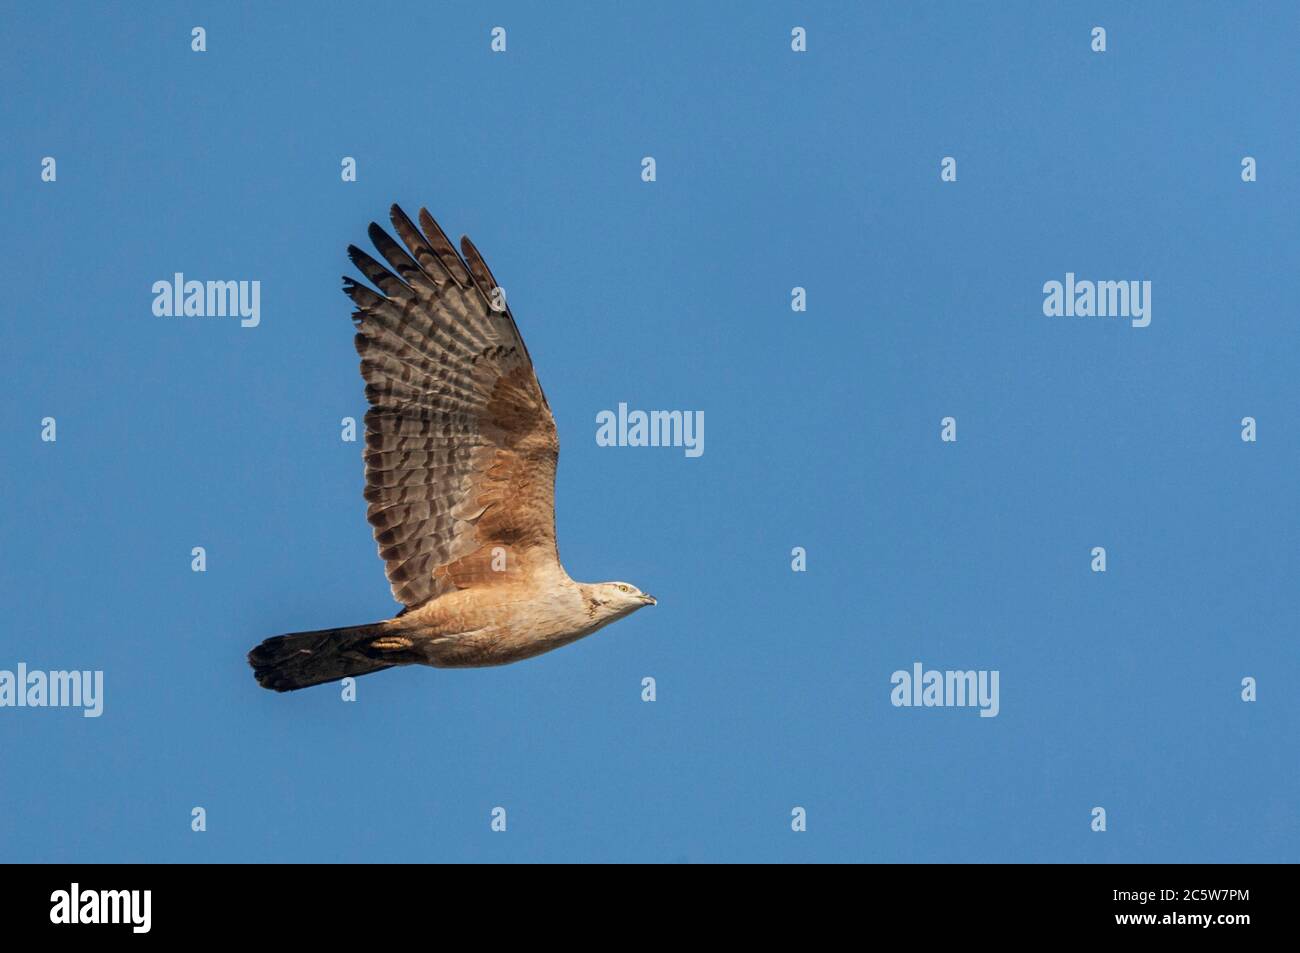 Crested Honey Buzzard (Pernis ptilorhynchus) migrating over Happy Island on the east coast of China. Stock Photo